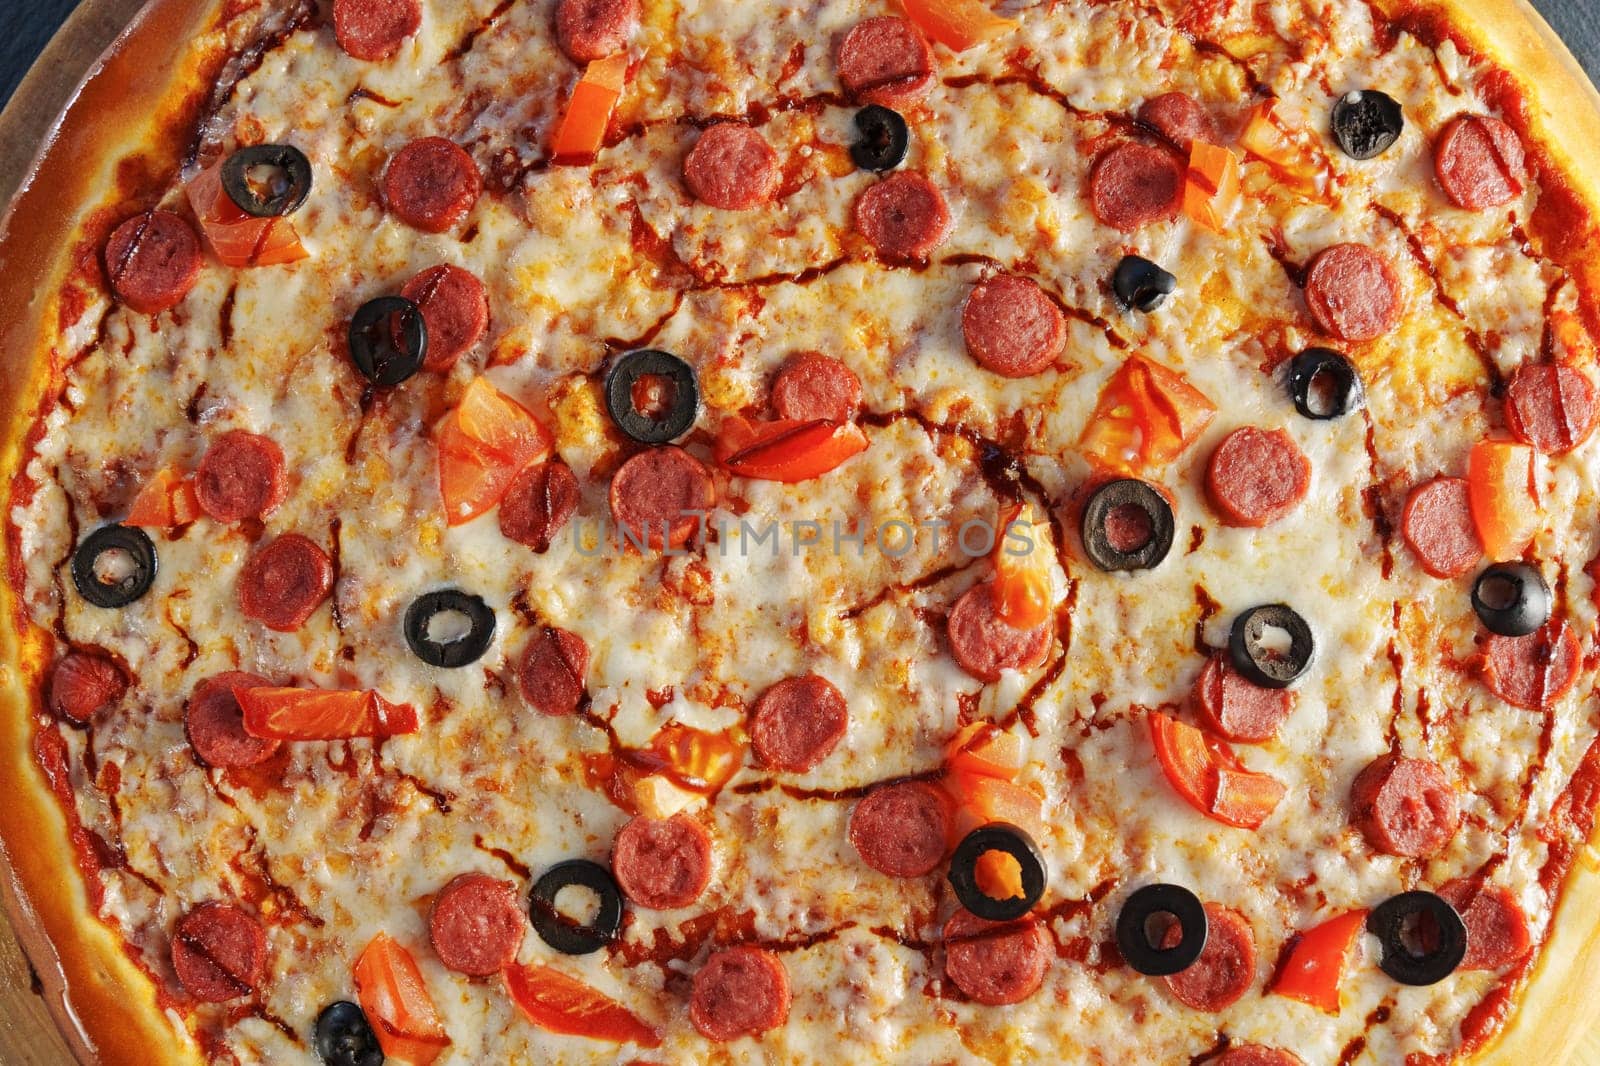 Pepperoni pizza adorned with black olives and red bell pepper slices, presented on a round wooden board by darksoul72